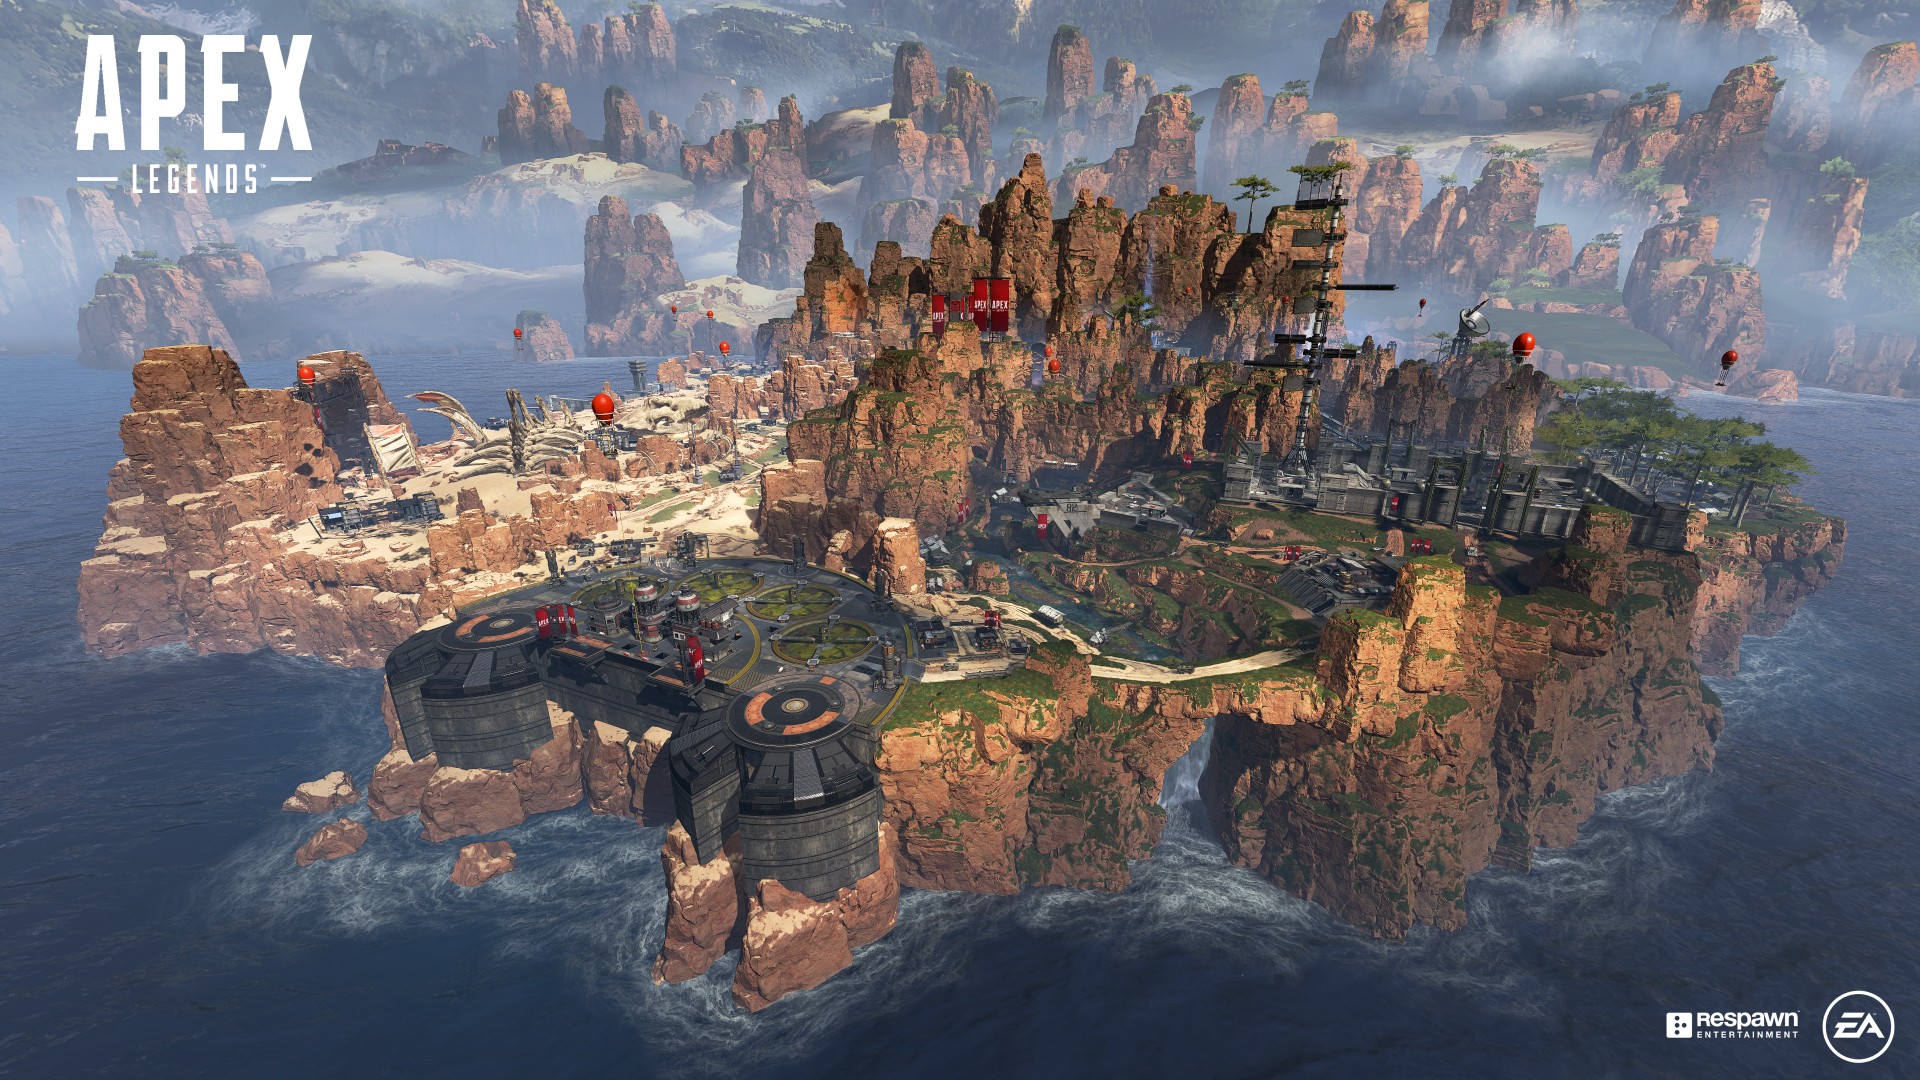 Play Apex Legends for free now on Xbox One R5_World_Overview_01_v02.jpg